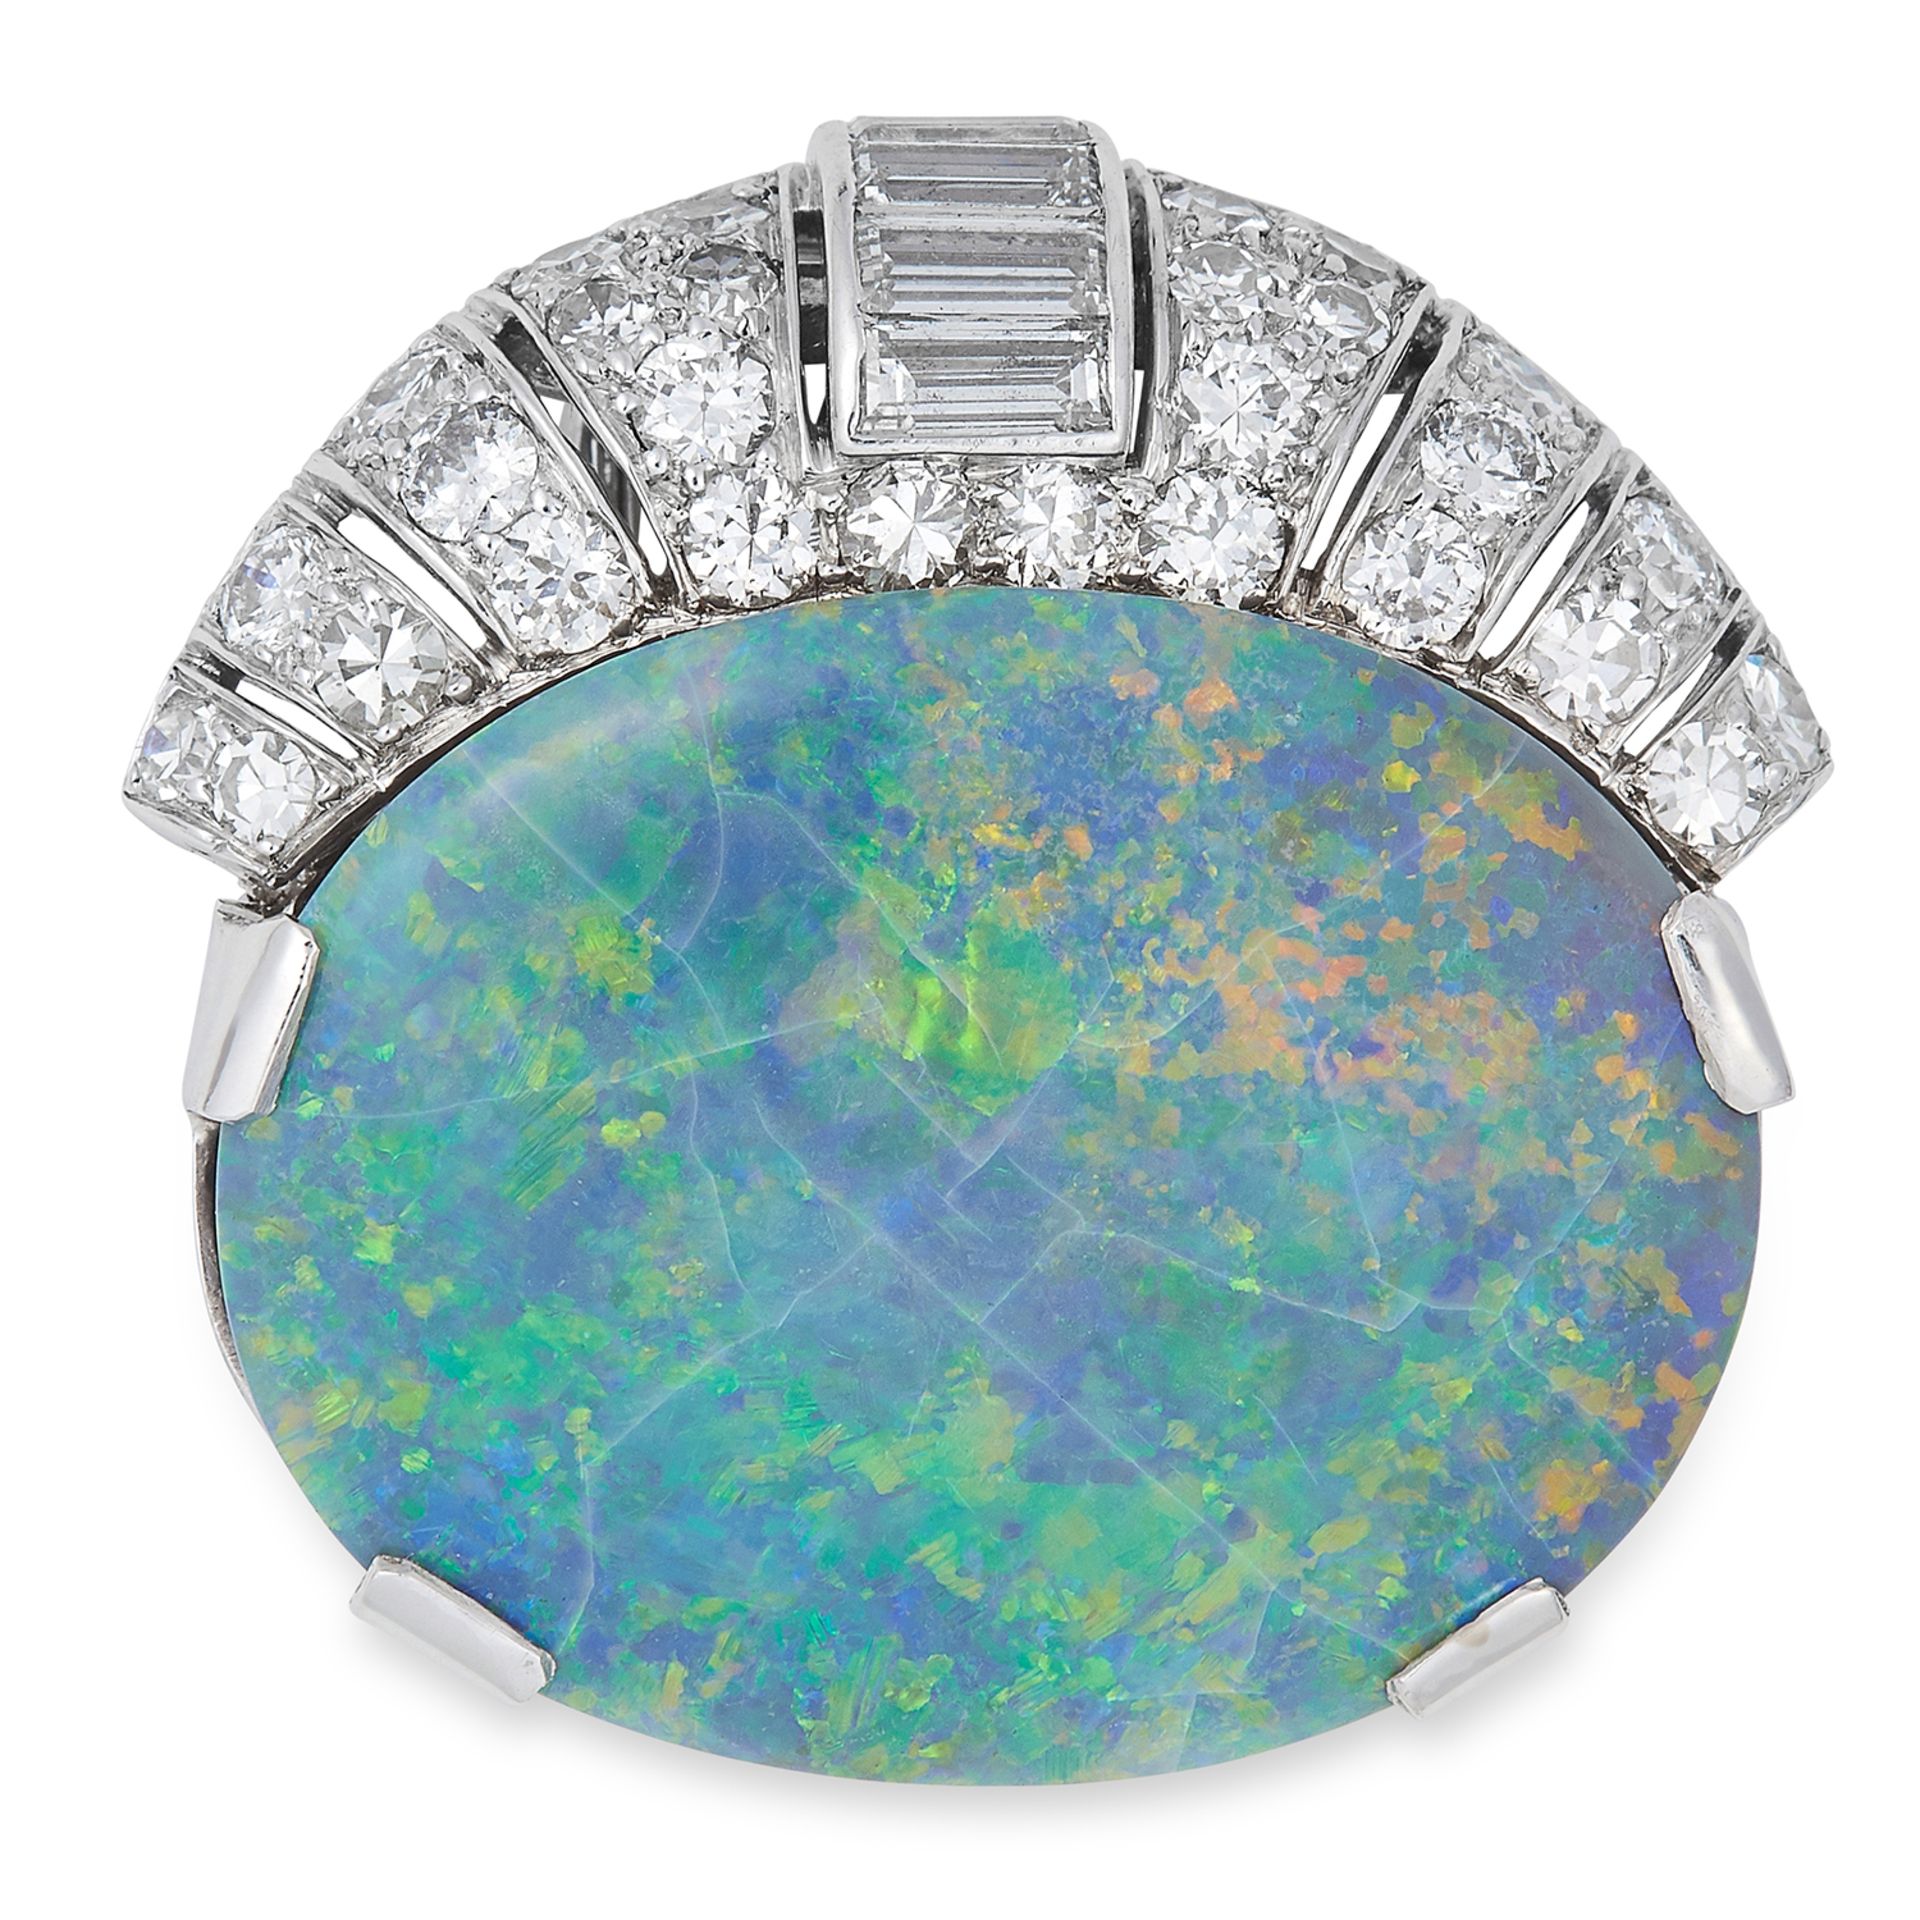 ART DECO BLACK OPAL AND DIAMOND CLIP BROOCH, CARTIER set with a cabochon opal of approximately 15.26